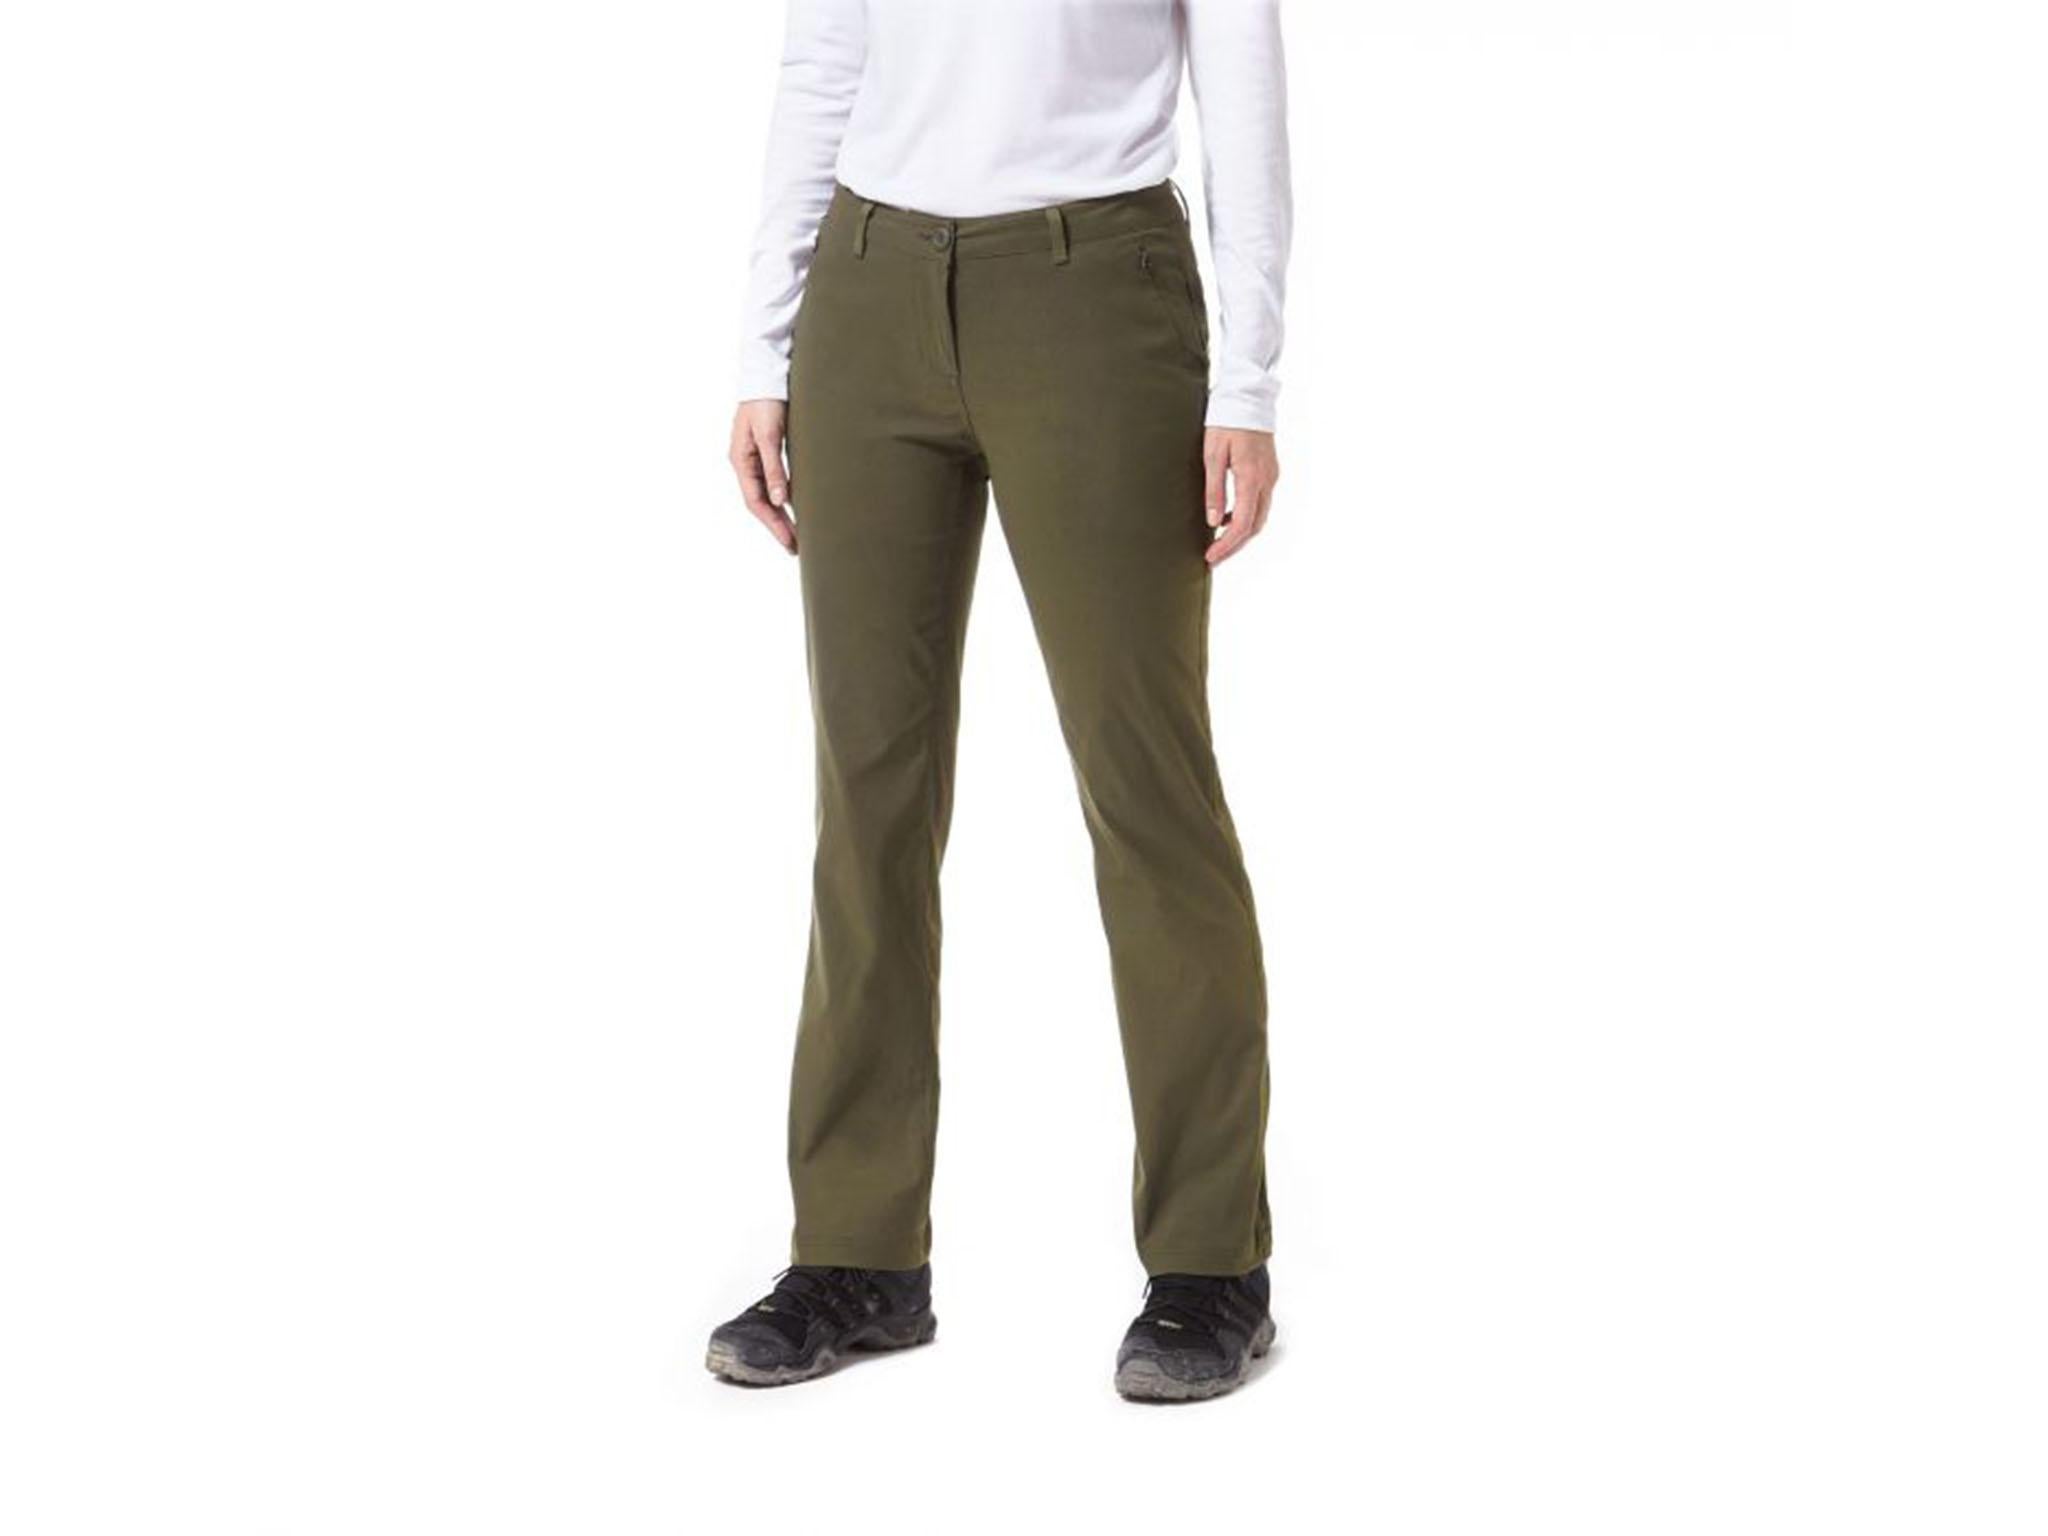 Our Top 5 Mens Walking Trousers